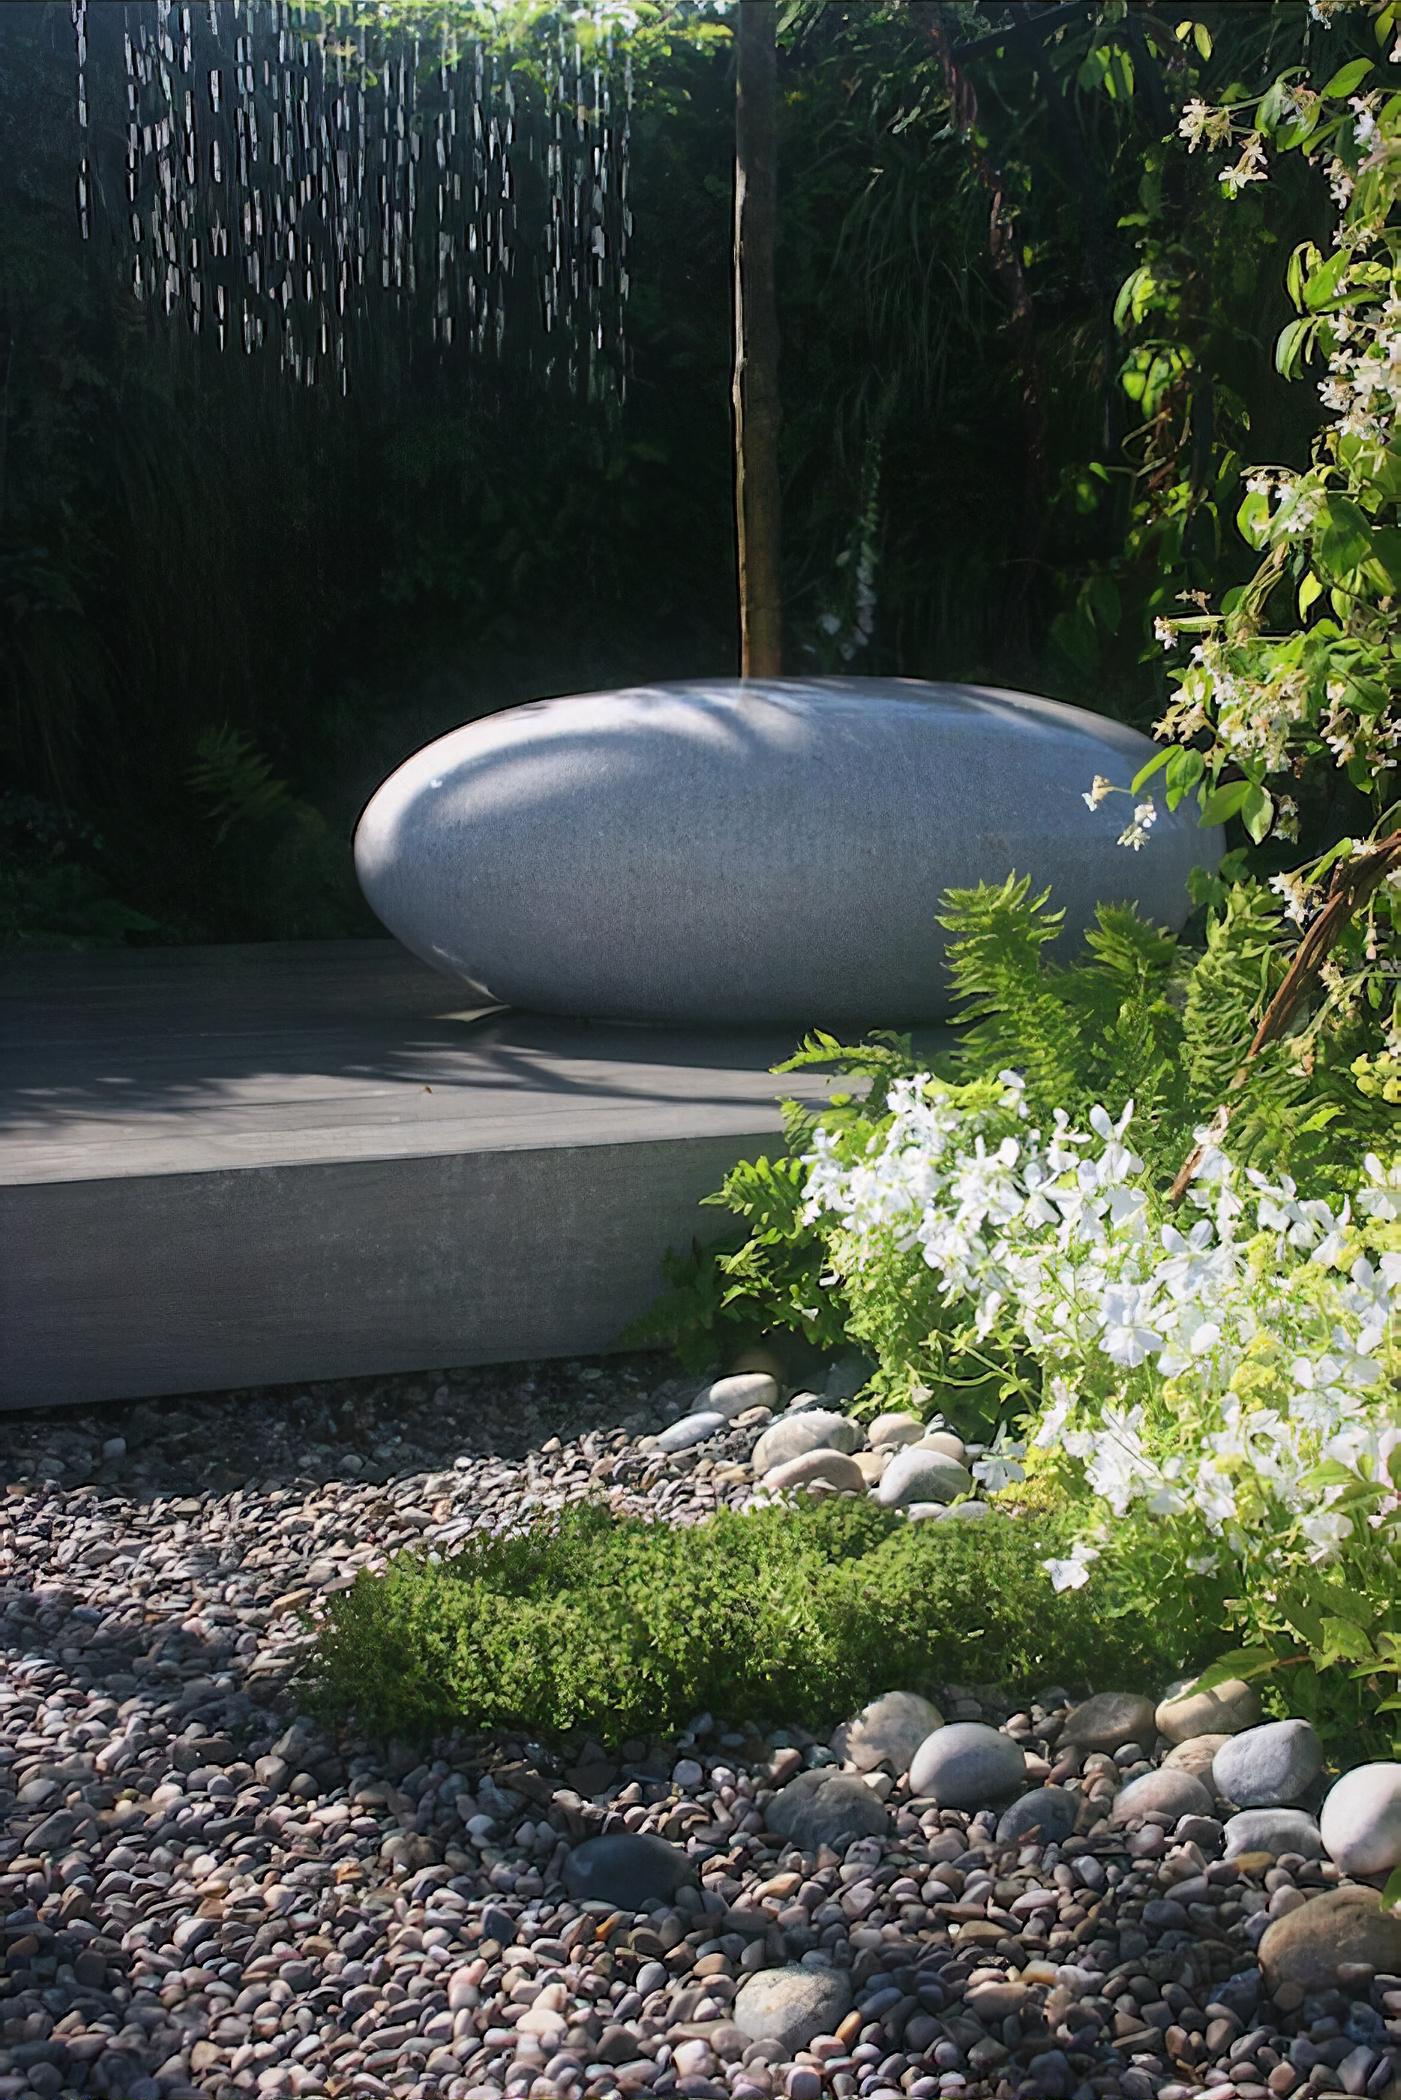 'Space Within' Mindfulness Garden Created by garden designer Rae Wilkinson the ‘Space Within’ garden at RHS Chatsworth Flower Show 2019, won an RHS Gold Medal, Best in Category and People’s Choice awards.